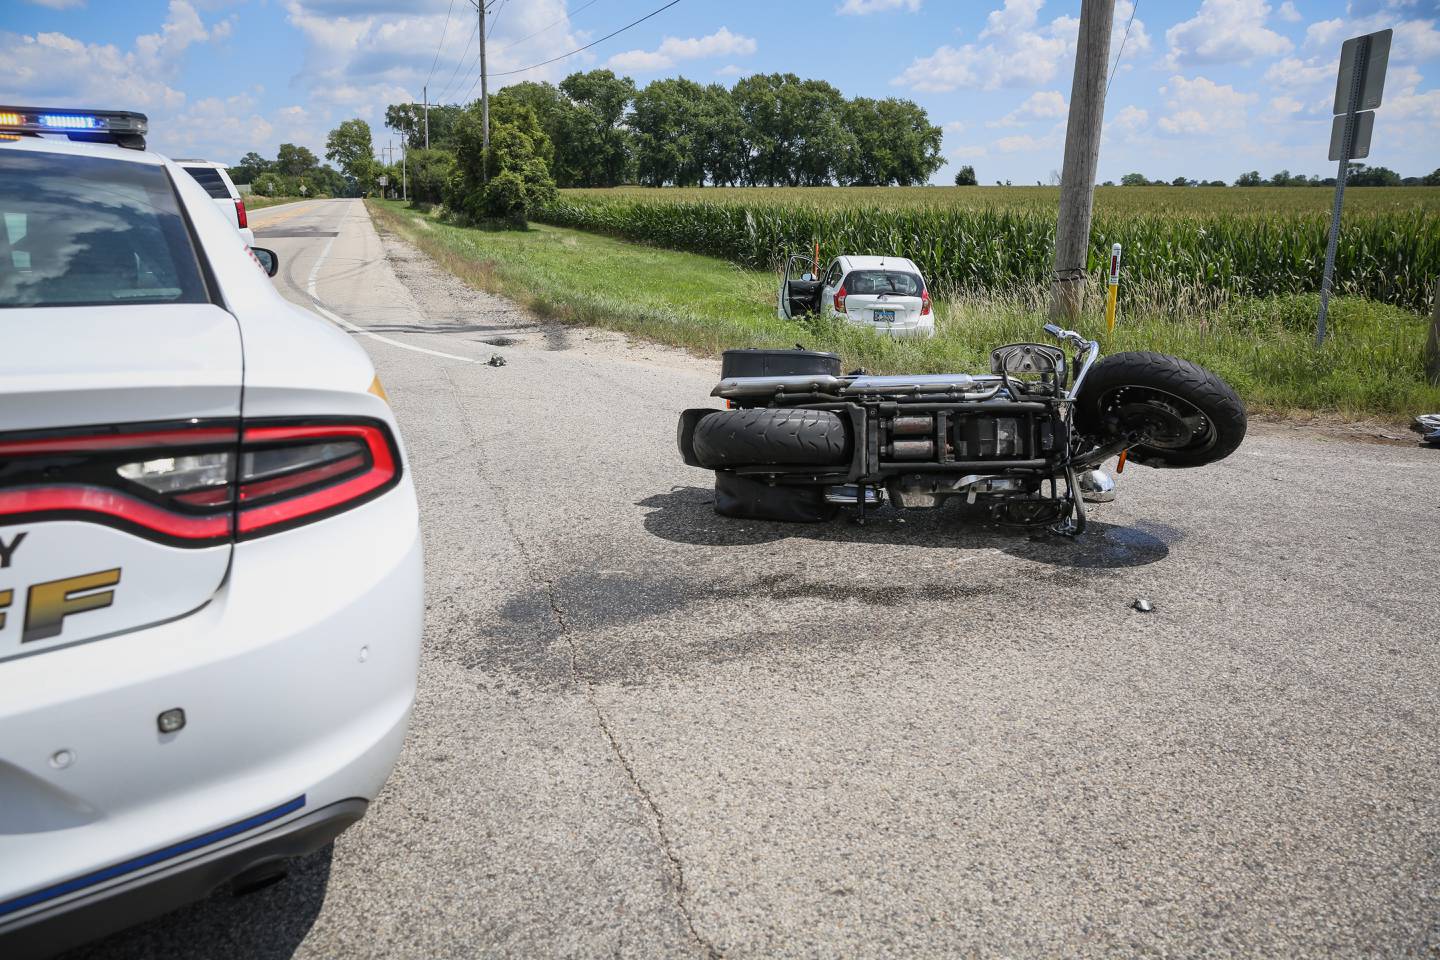 A motorcycle and Nissan crashed along Route 173 Thursday, Aug. 18, 2022. The motorcyclist was airlifted to the hospital, but is in stable condition.